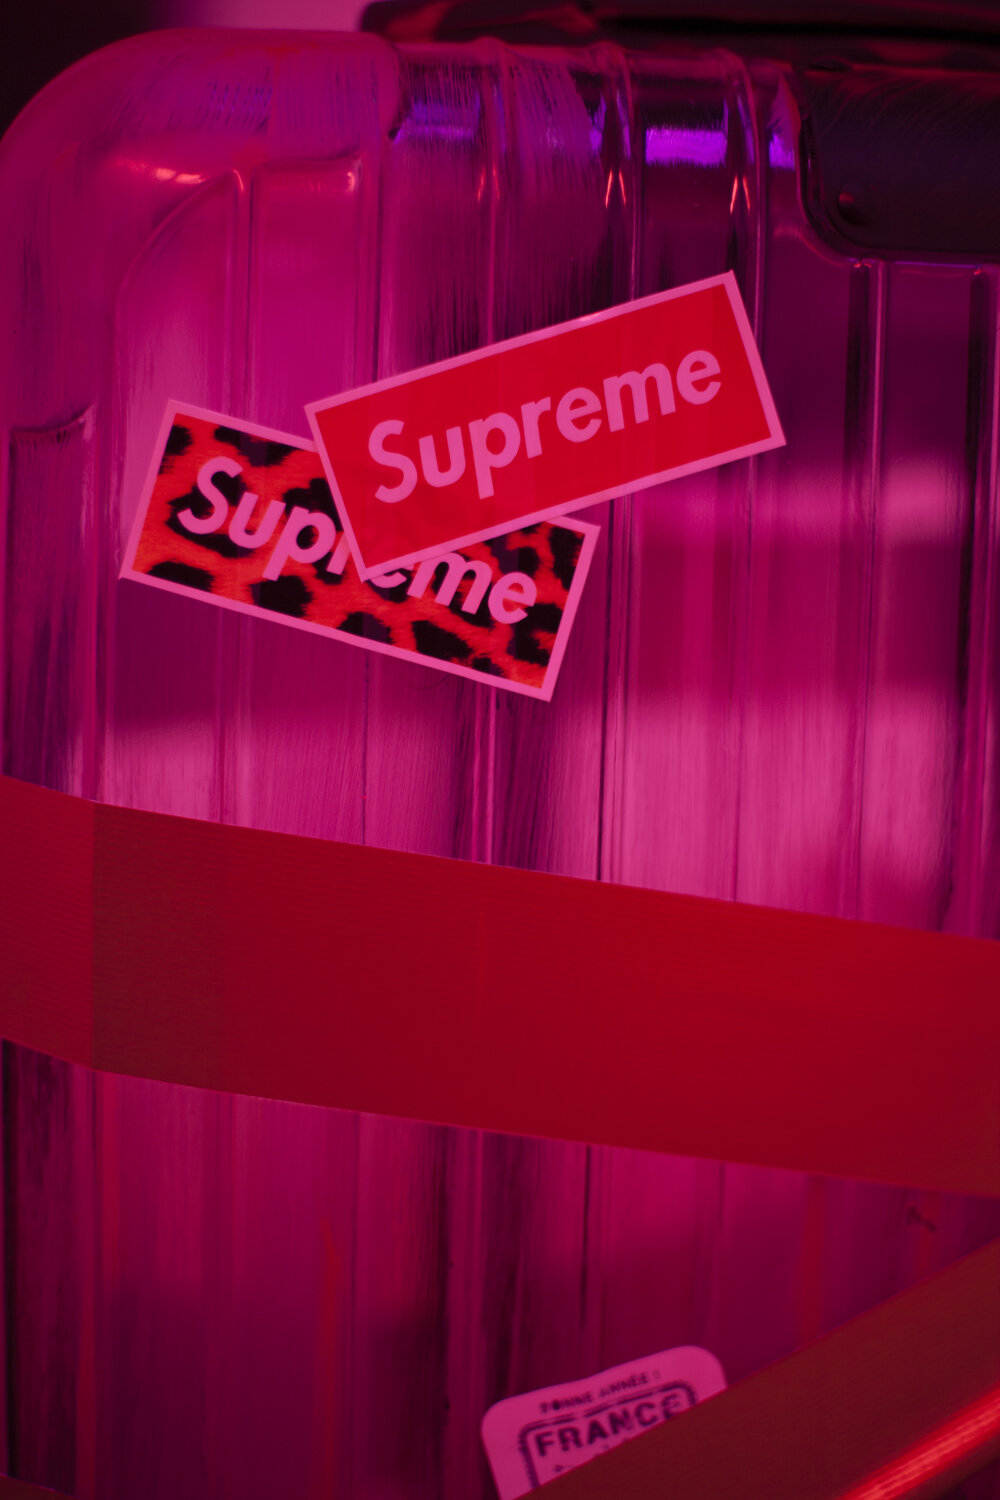   Supreme  (detail) ,  2019. PVC, acrylic, duct-tape. 39 x 15 x 8 inches. 